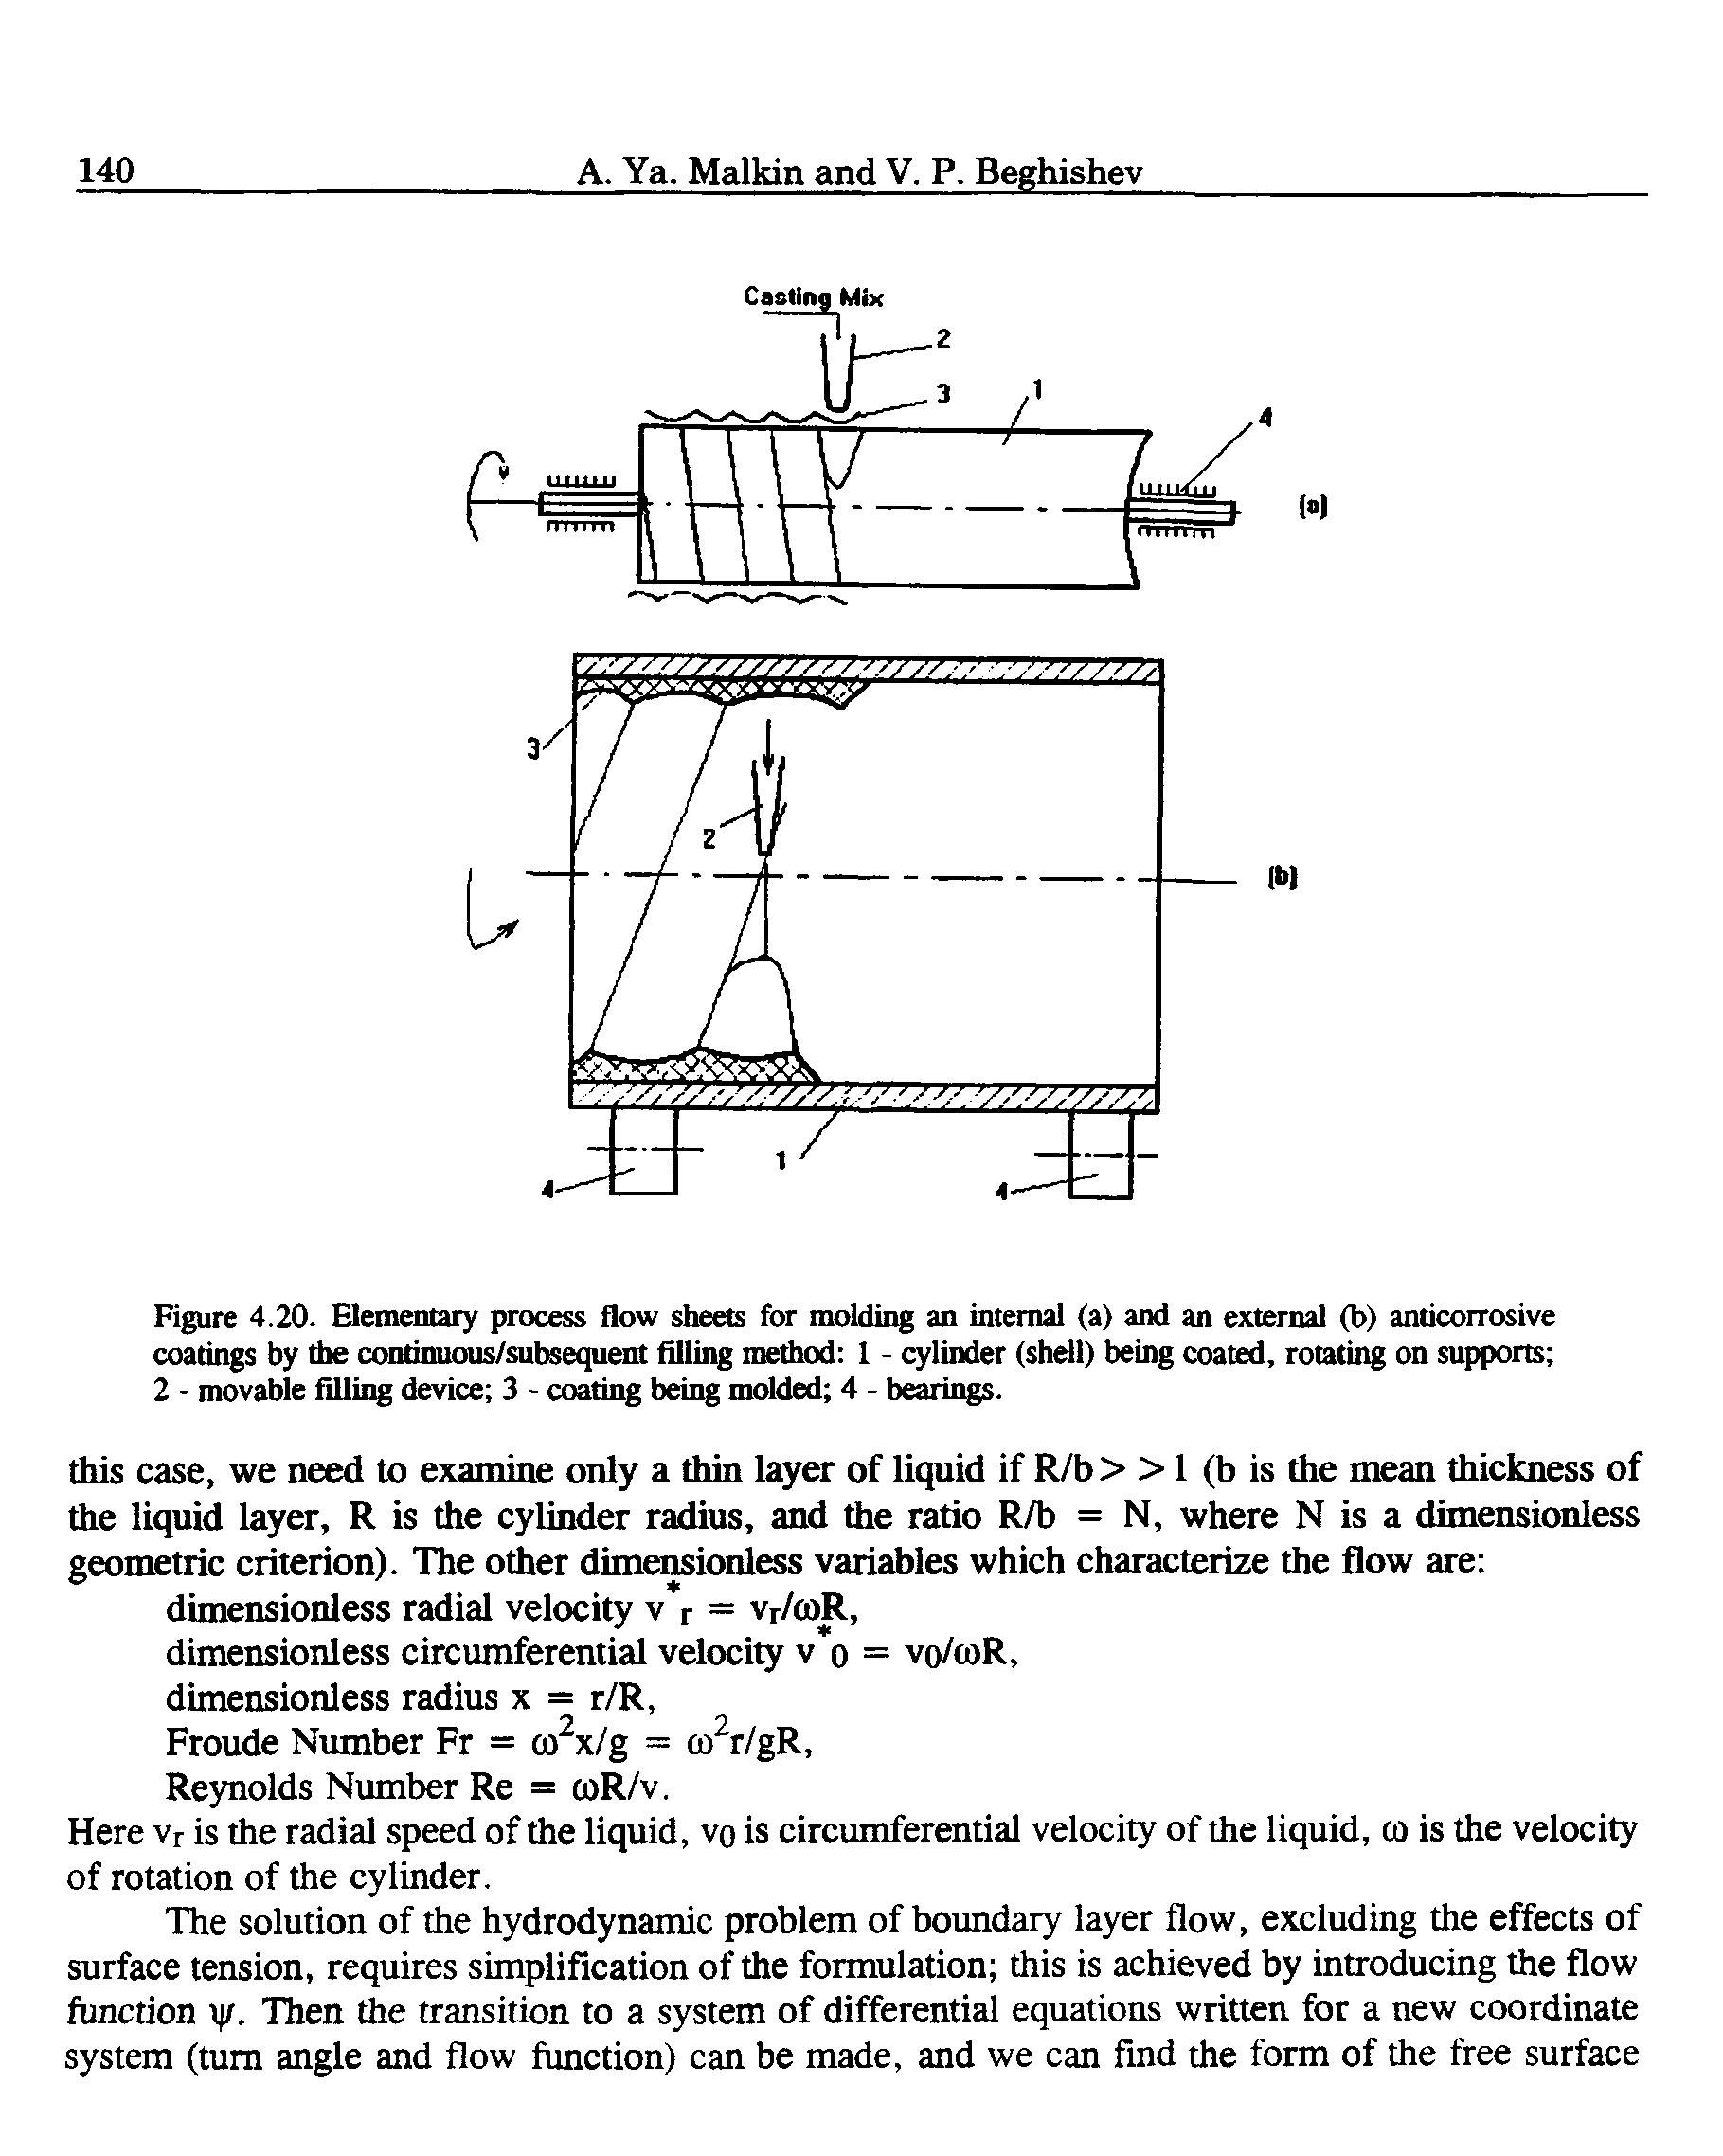 Figure 4.20. Elementary process flow sheets for molding an internal (a) and an external (b) anticorrosive coatings by the contmuous/subsequent filling method 1 - cylinder (shell) being coated, rotating on supports ...